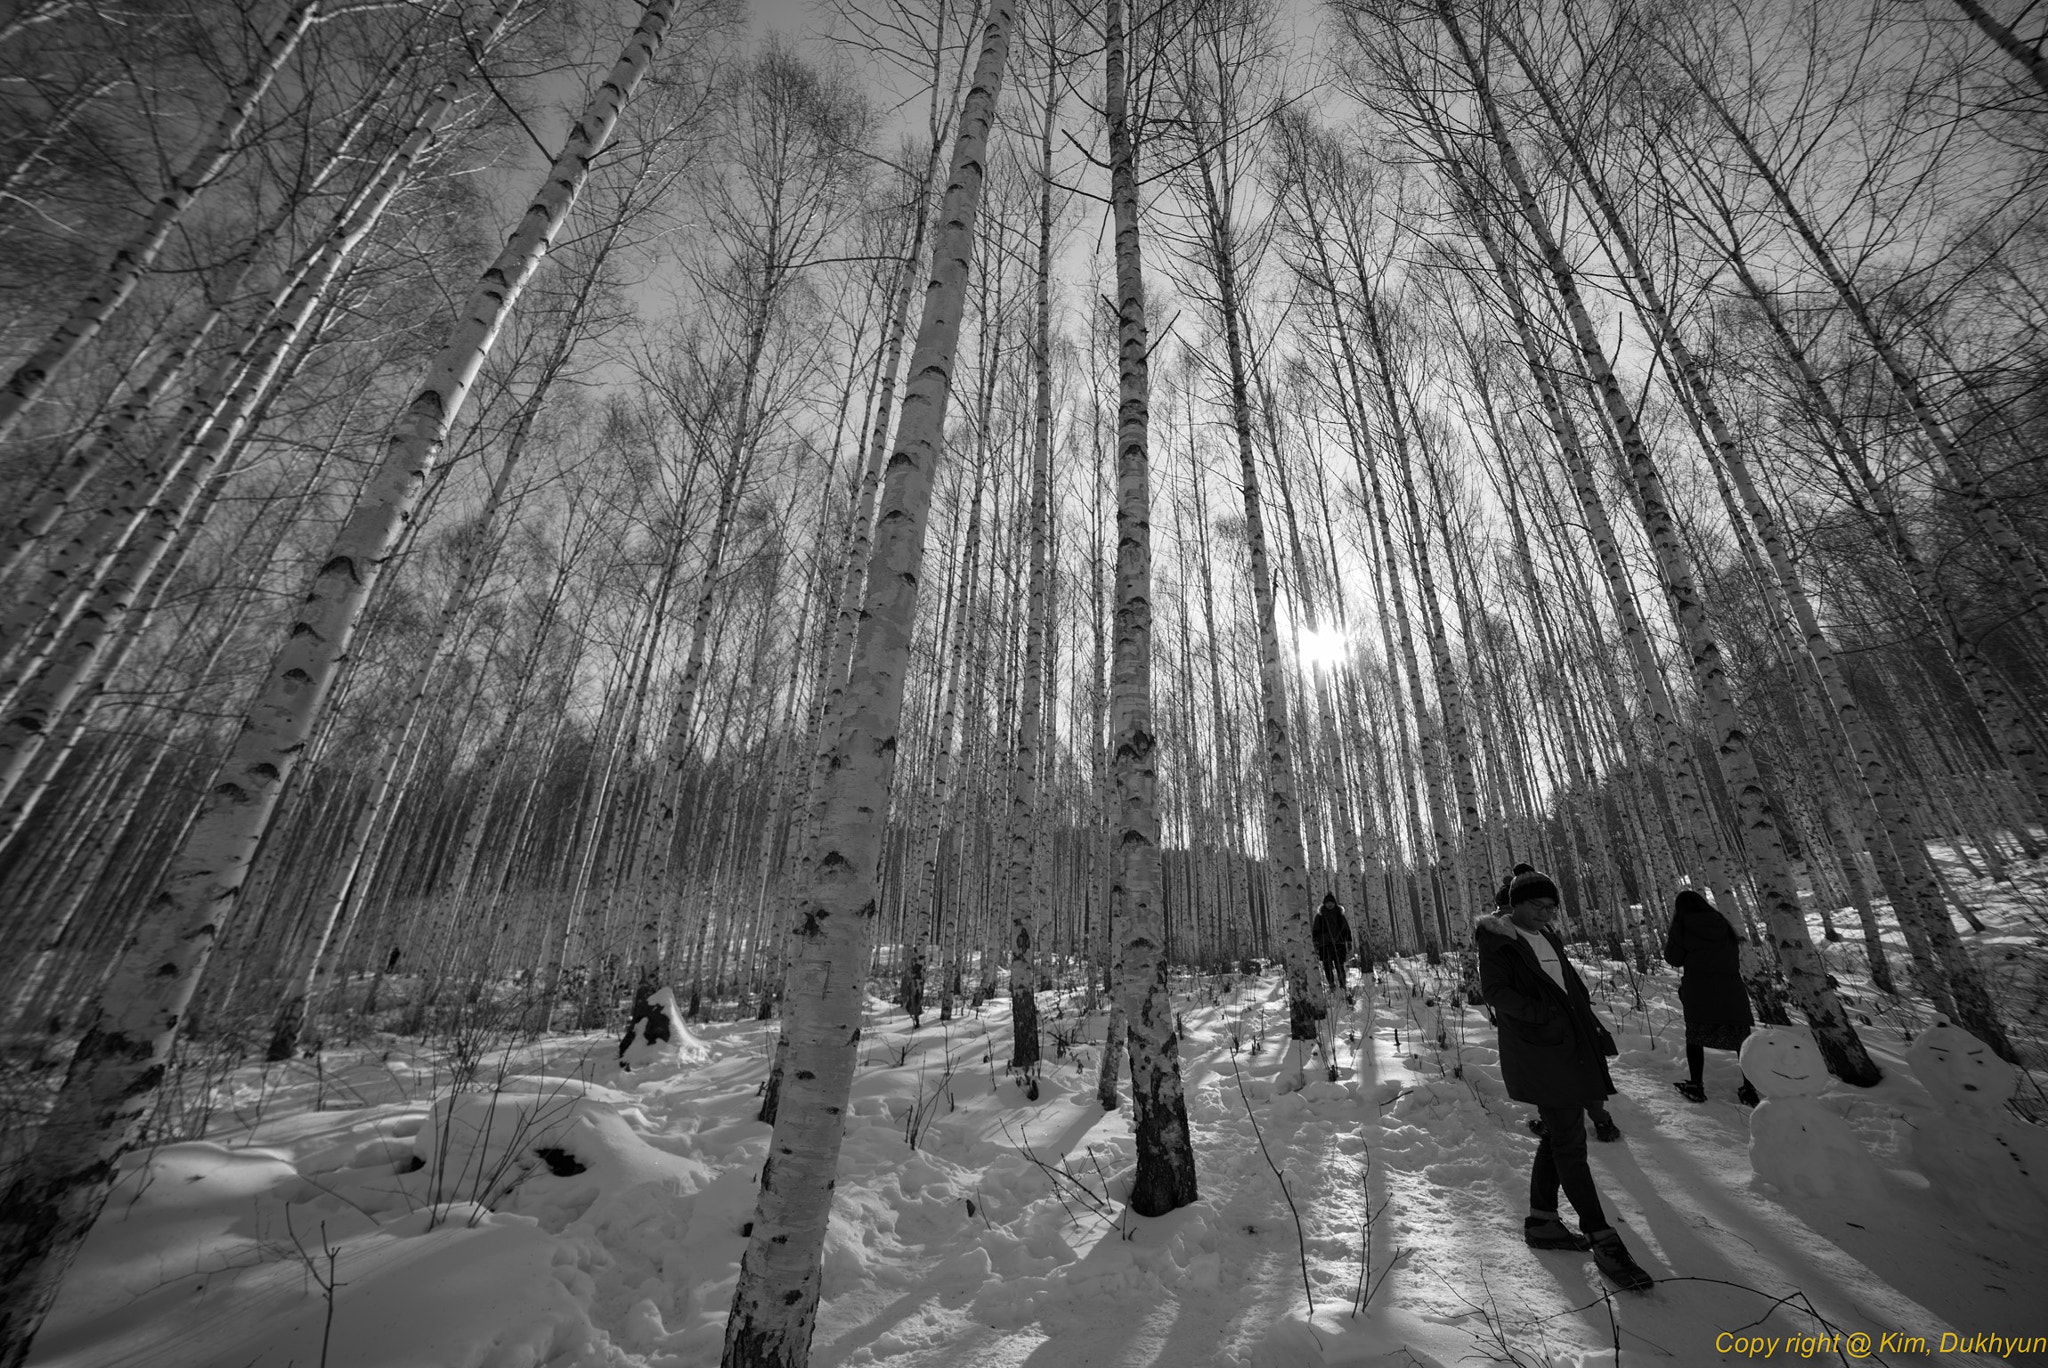 Pentax K-1 sample photo. Strolling in the birch forest photography